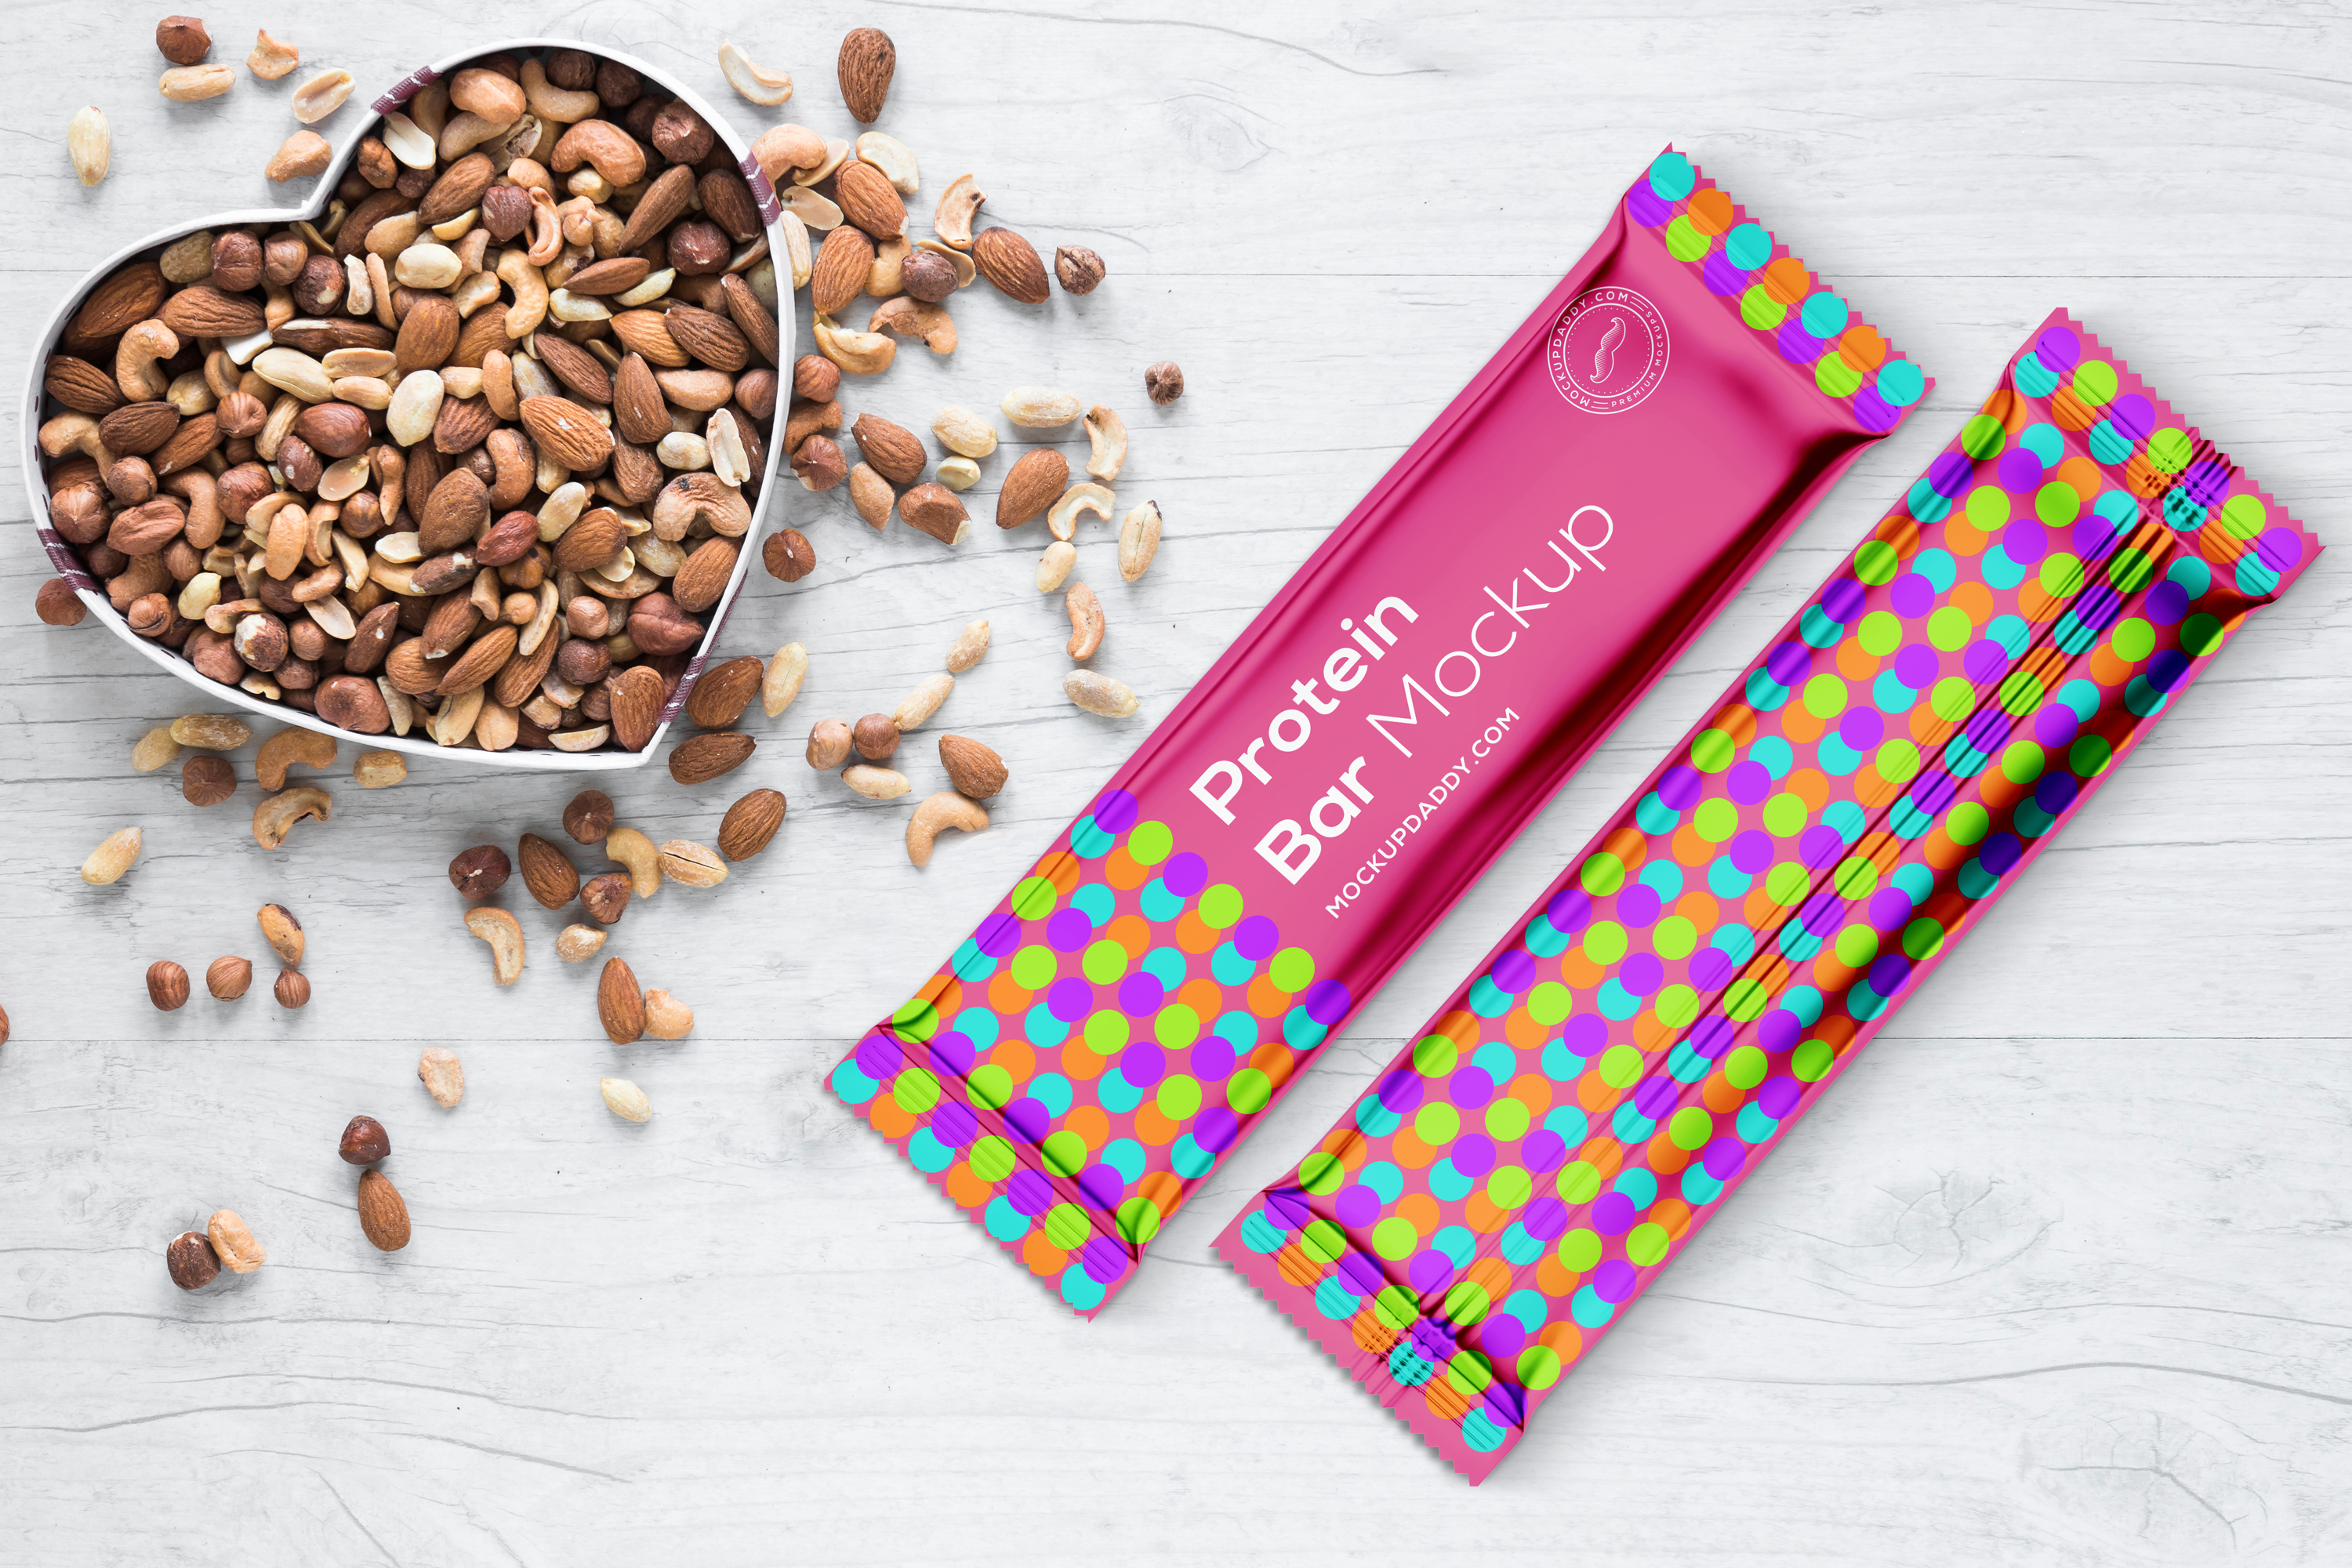 PSD mockup of two protein bars in a bowl with nuts on a wooden table.